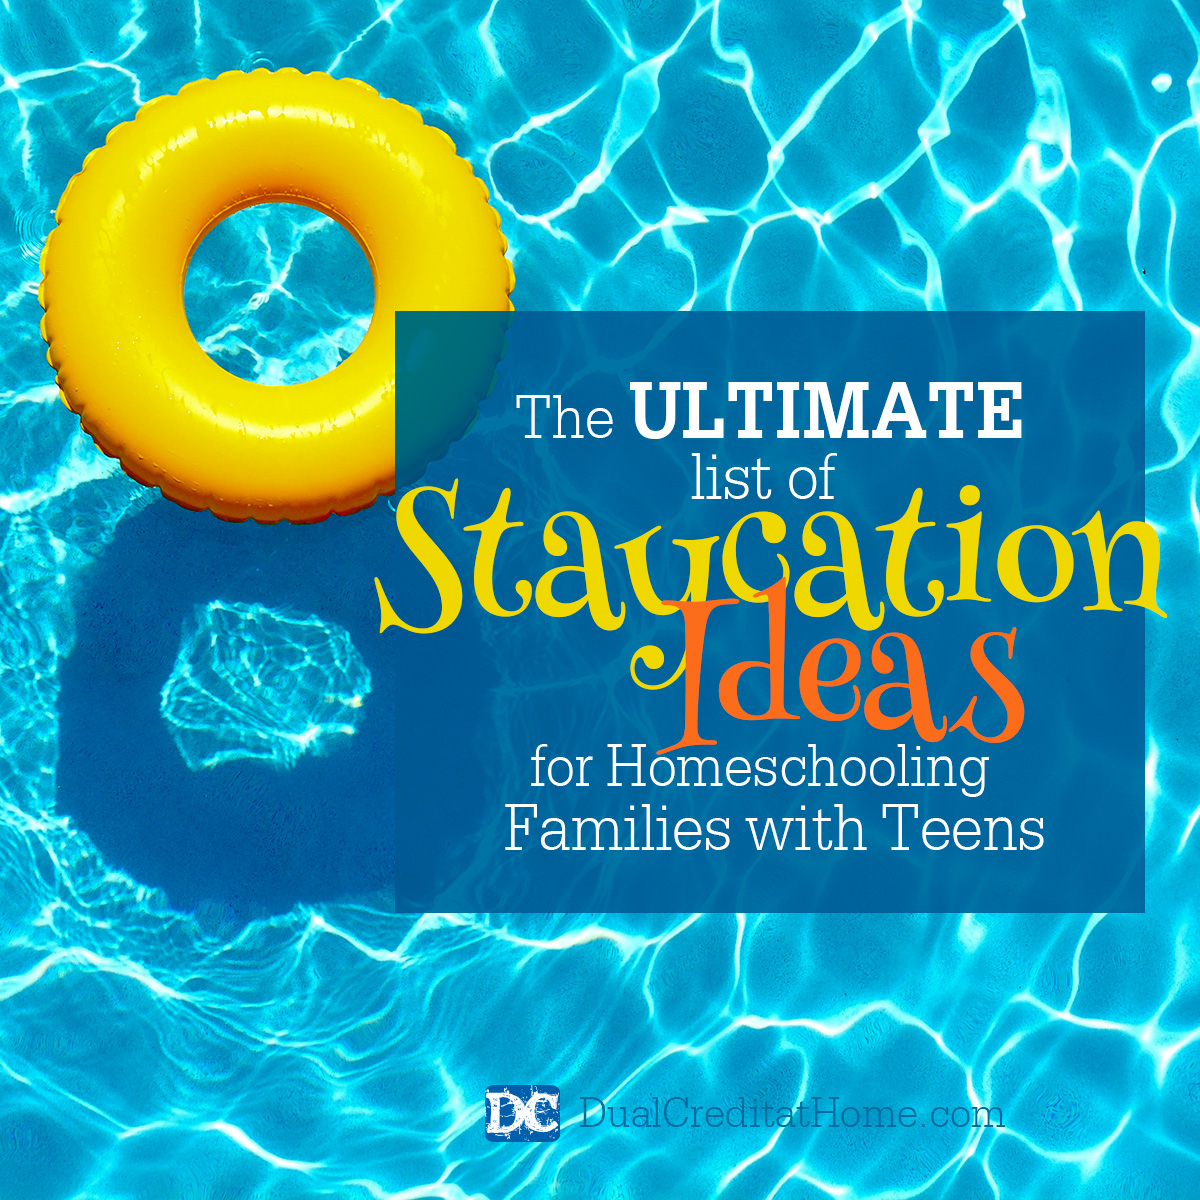 The Ultimate List of Staycation Ideas for Homeschool Families with Teens